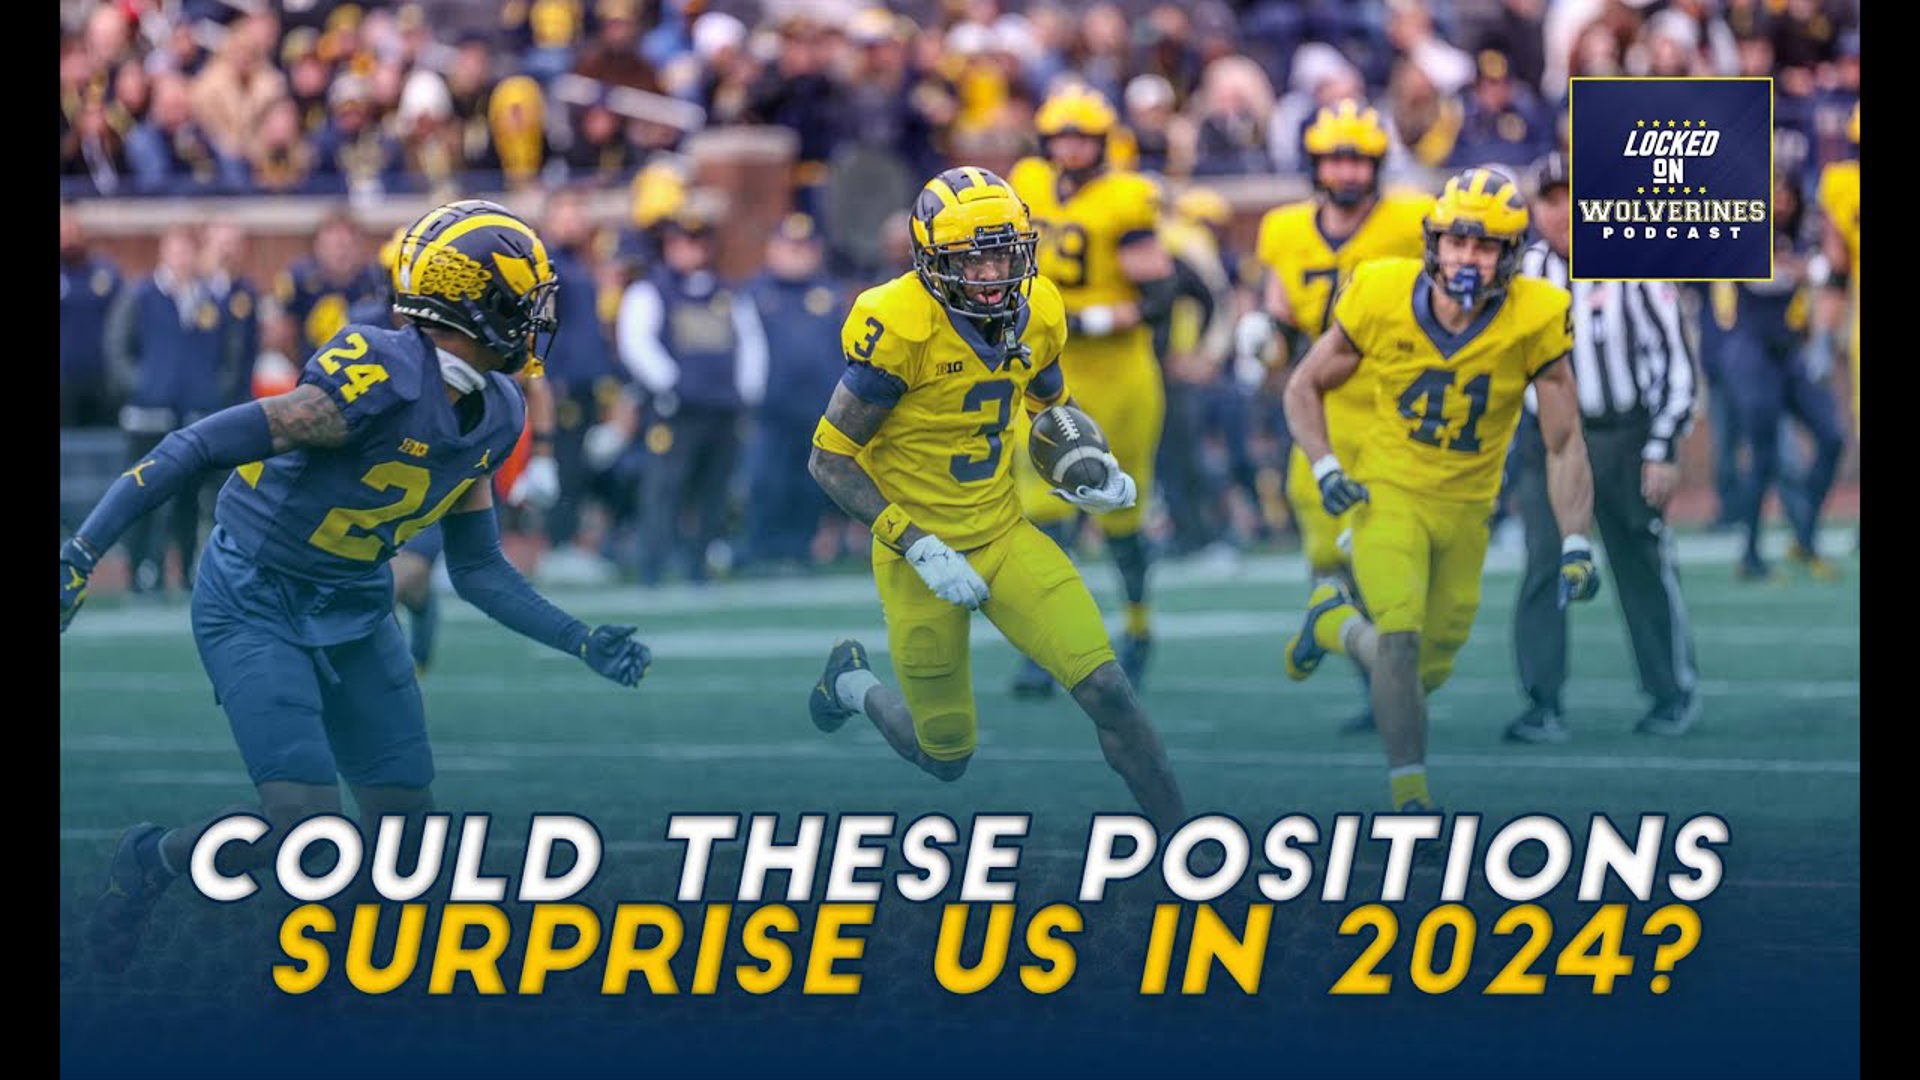 Maybe the Michigan football WR and QB positions are better than previously thought